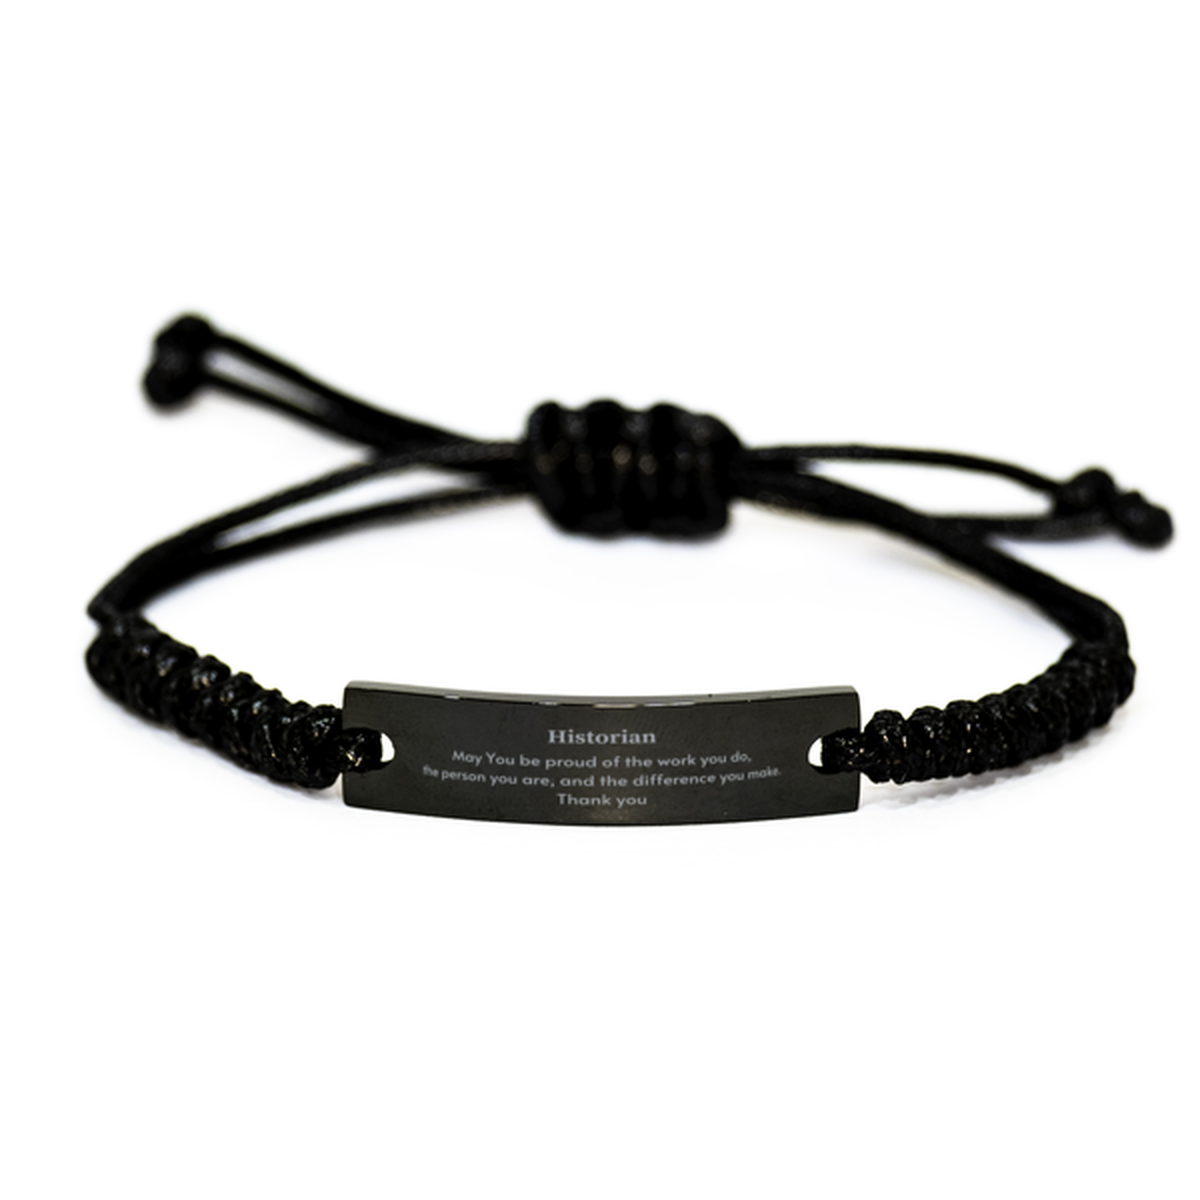 Heartwarming Black Rope Bracelet Retirement Coworkers Gifts for Historian, Historian May You be proud of the work you do, the person you are Gifts for Boss Men Women Friends